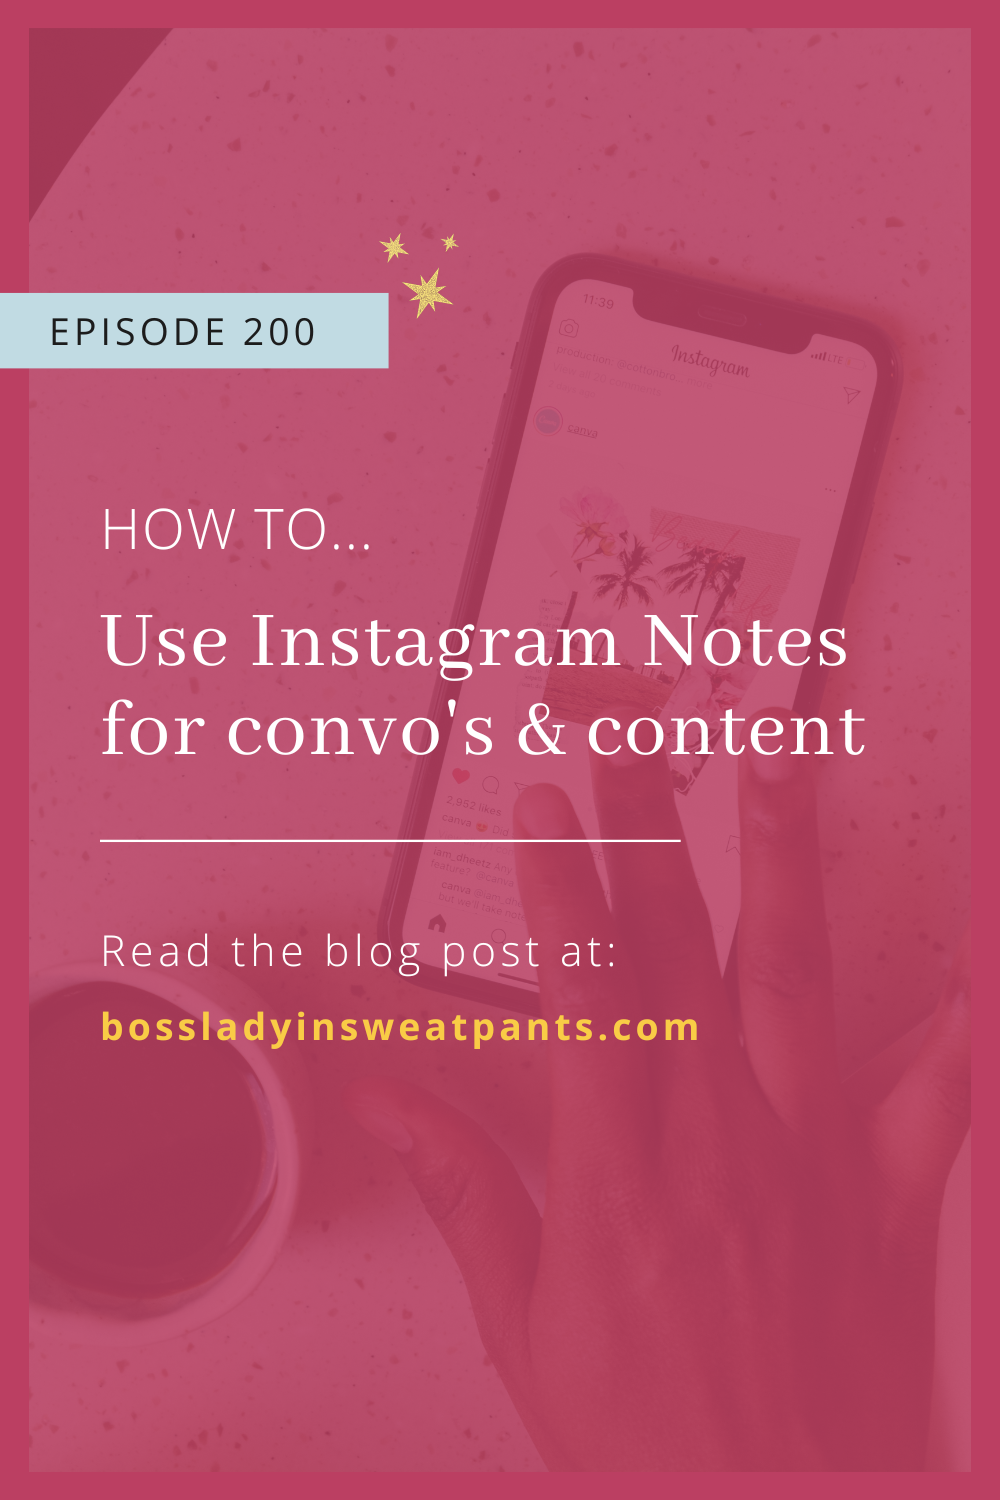 pink graphic with text: how to use Instagram Notes | background image of cell phone, a hand and coffee mug